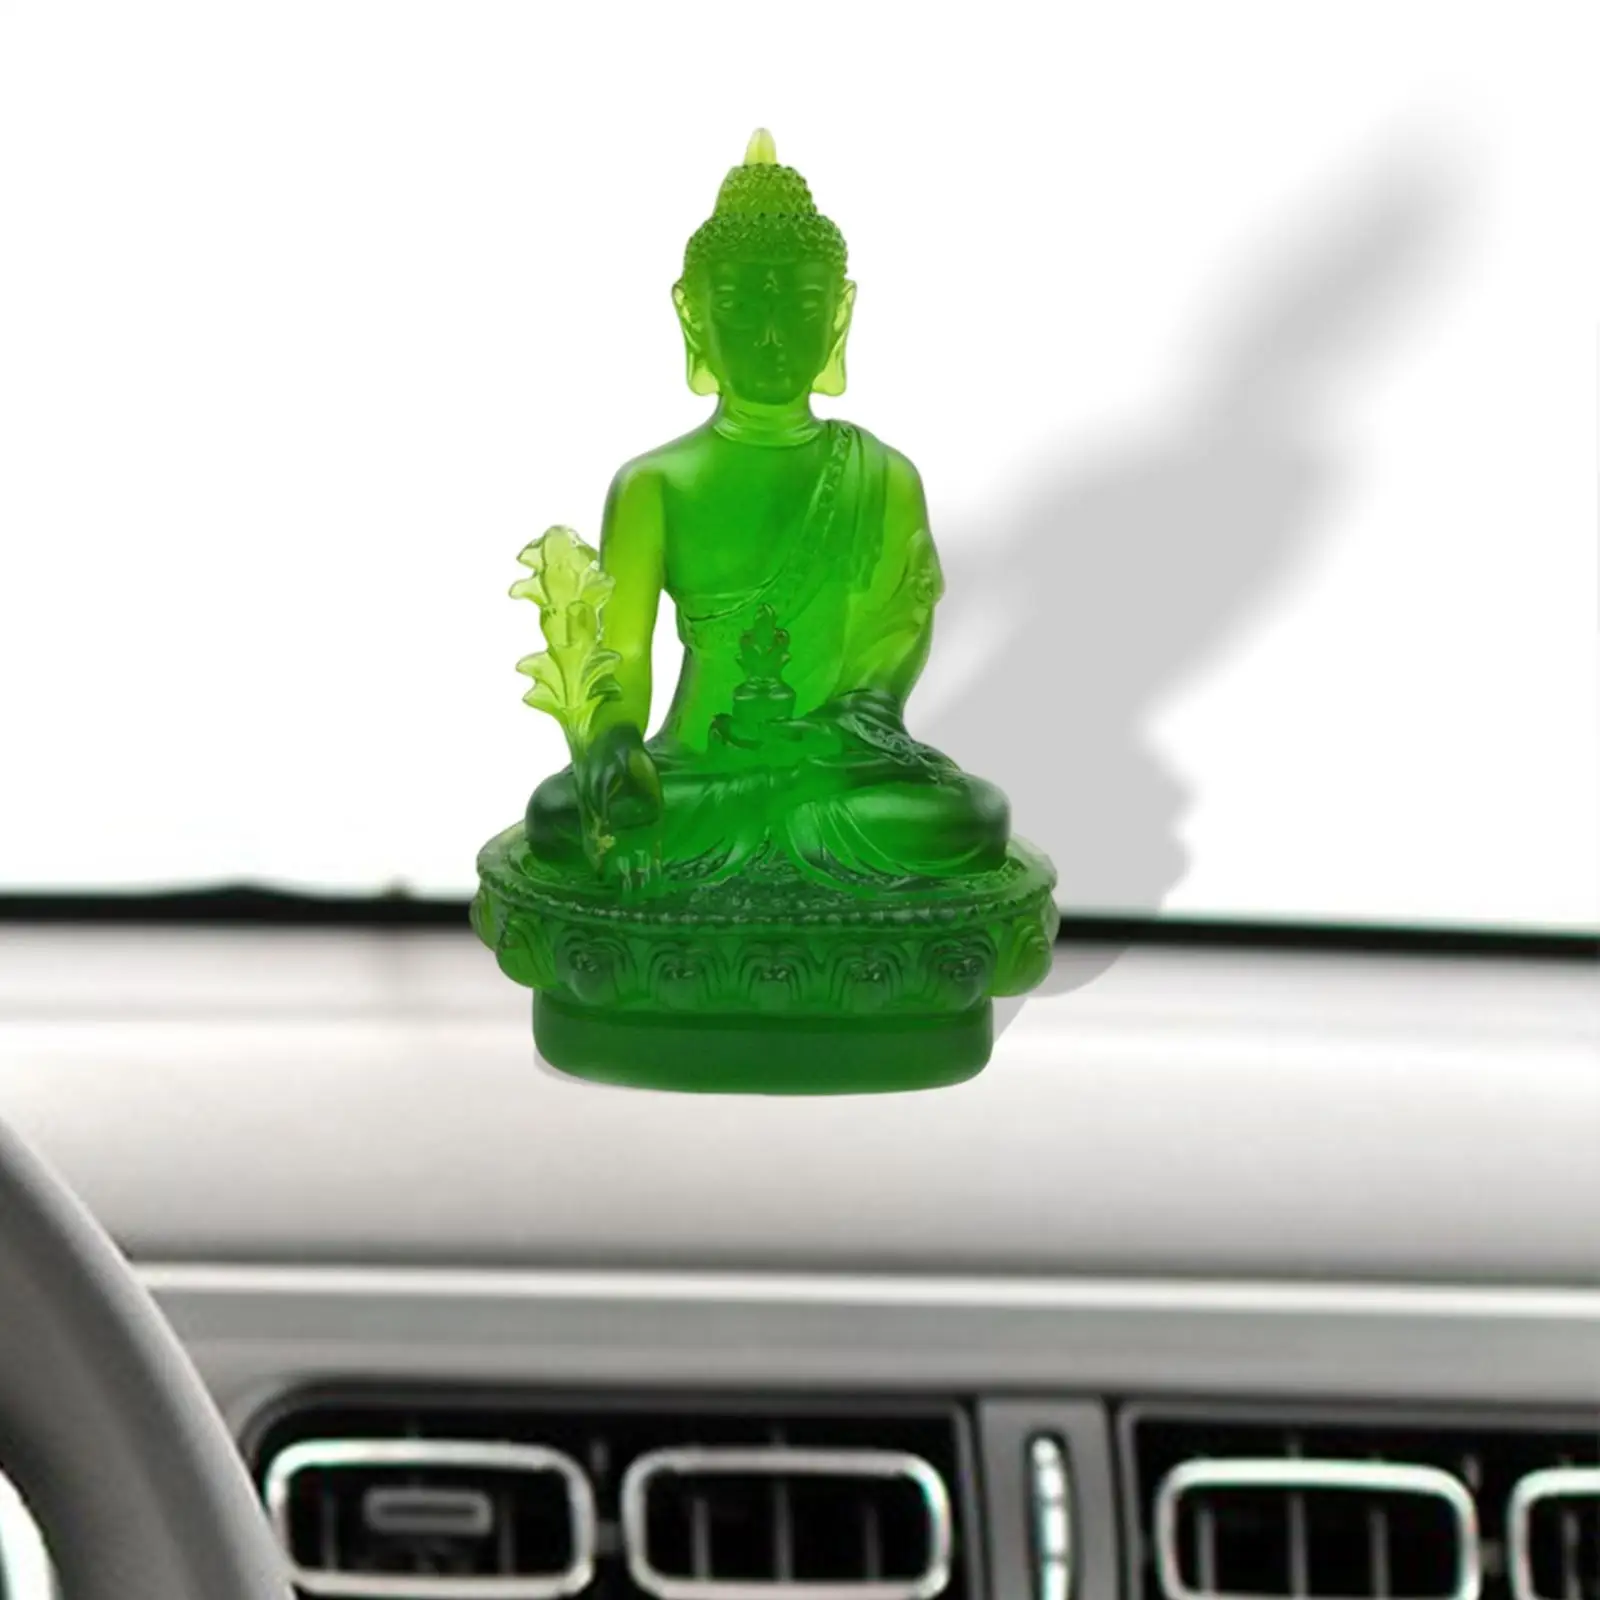 Meditation Buddha Statue Pharmacist Sculpture Enshrined Decorations Figurines Collection for Meditation Living Room Office Home